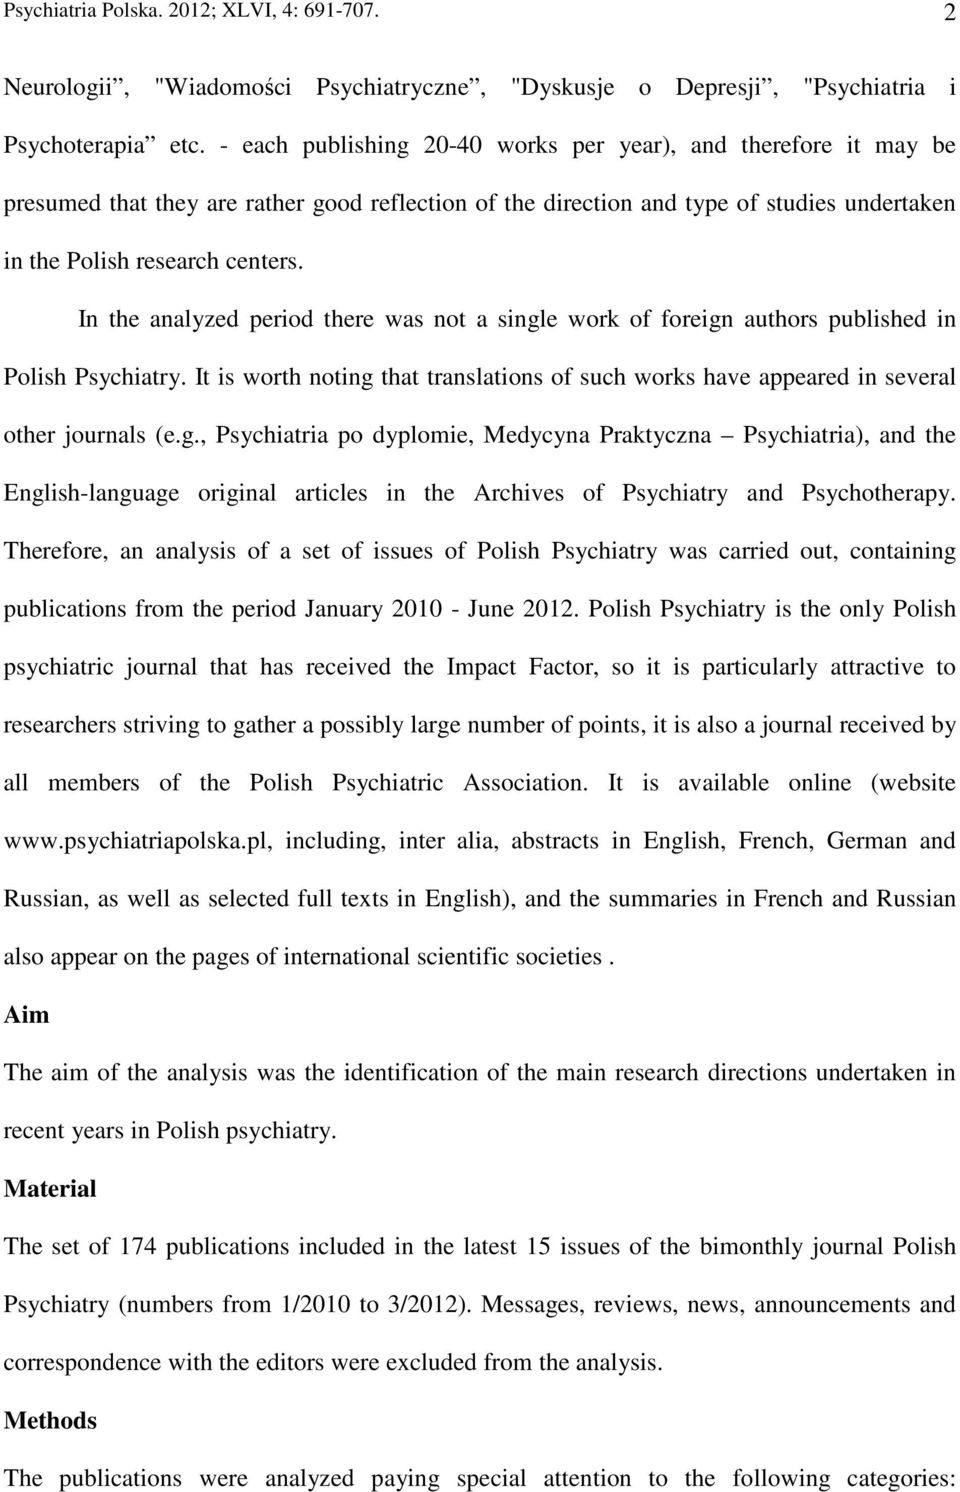 In the analyzed period there was not a single work of foreign authors published in Polish Psychiatry. It is worth noting that translations of such works have appeared in several other journals (e.g., Psychiatria po dyplomie, Medycyna Praktyczna Psychiatria), and the English-language original articles in the Archives of Psychiatry and Psychotherapy.